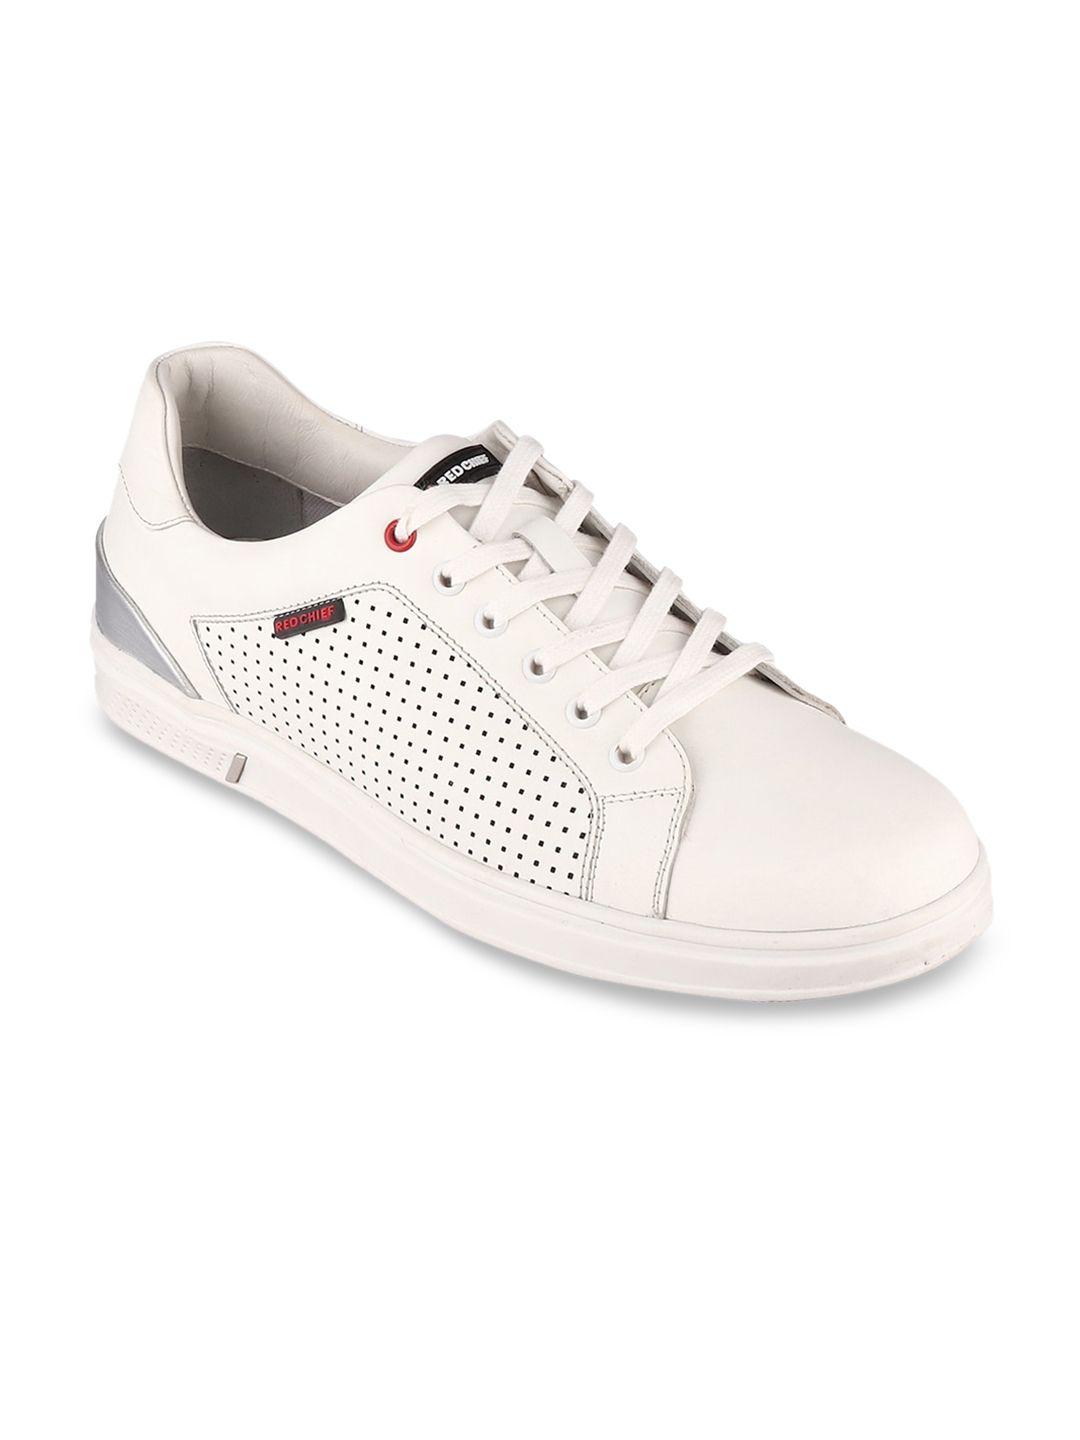 red-chief-men-off-white-perforations-leather-driving-shoes